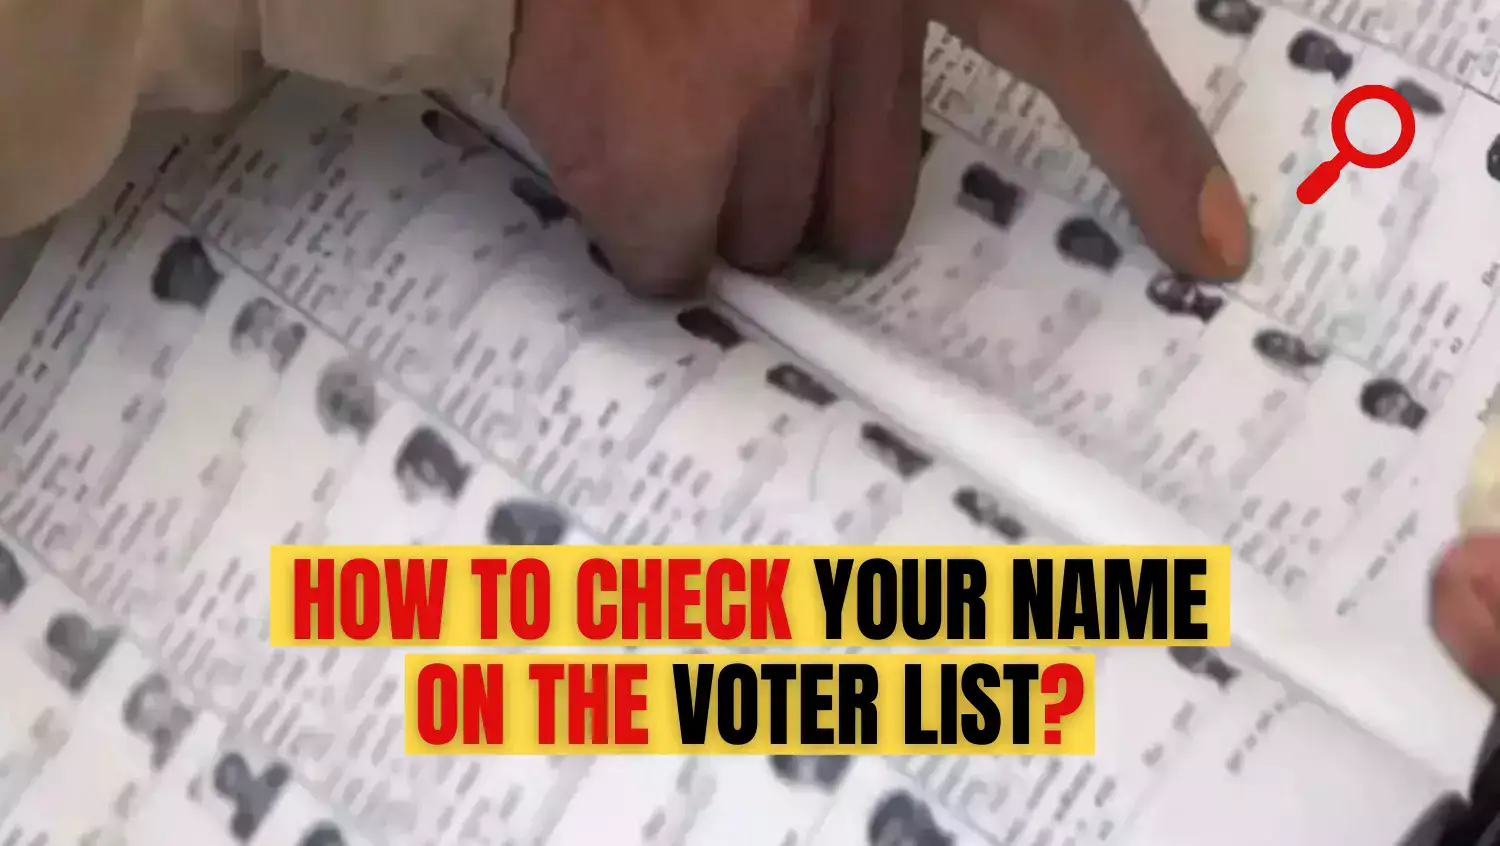 How to check your name on the voter list